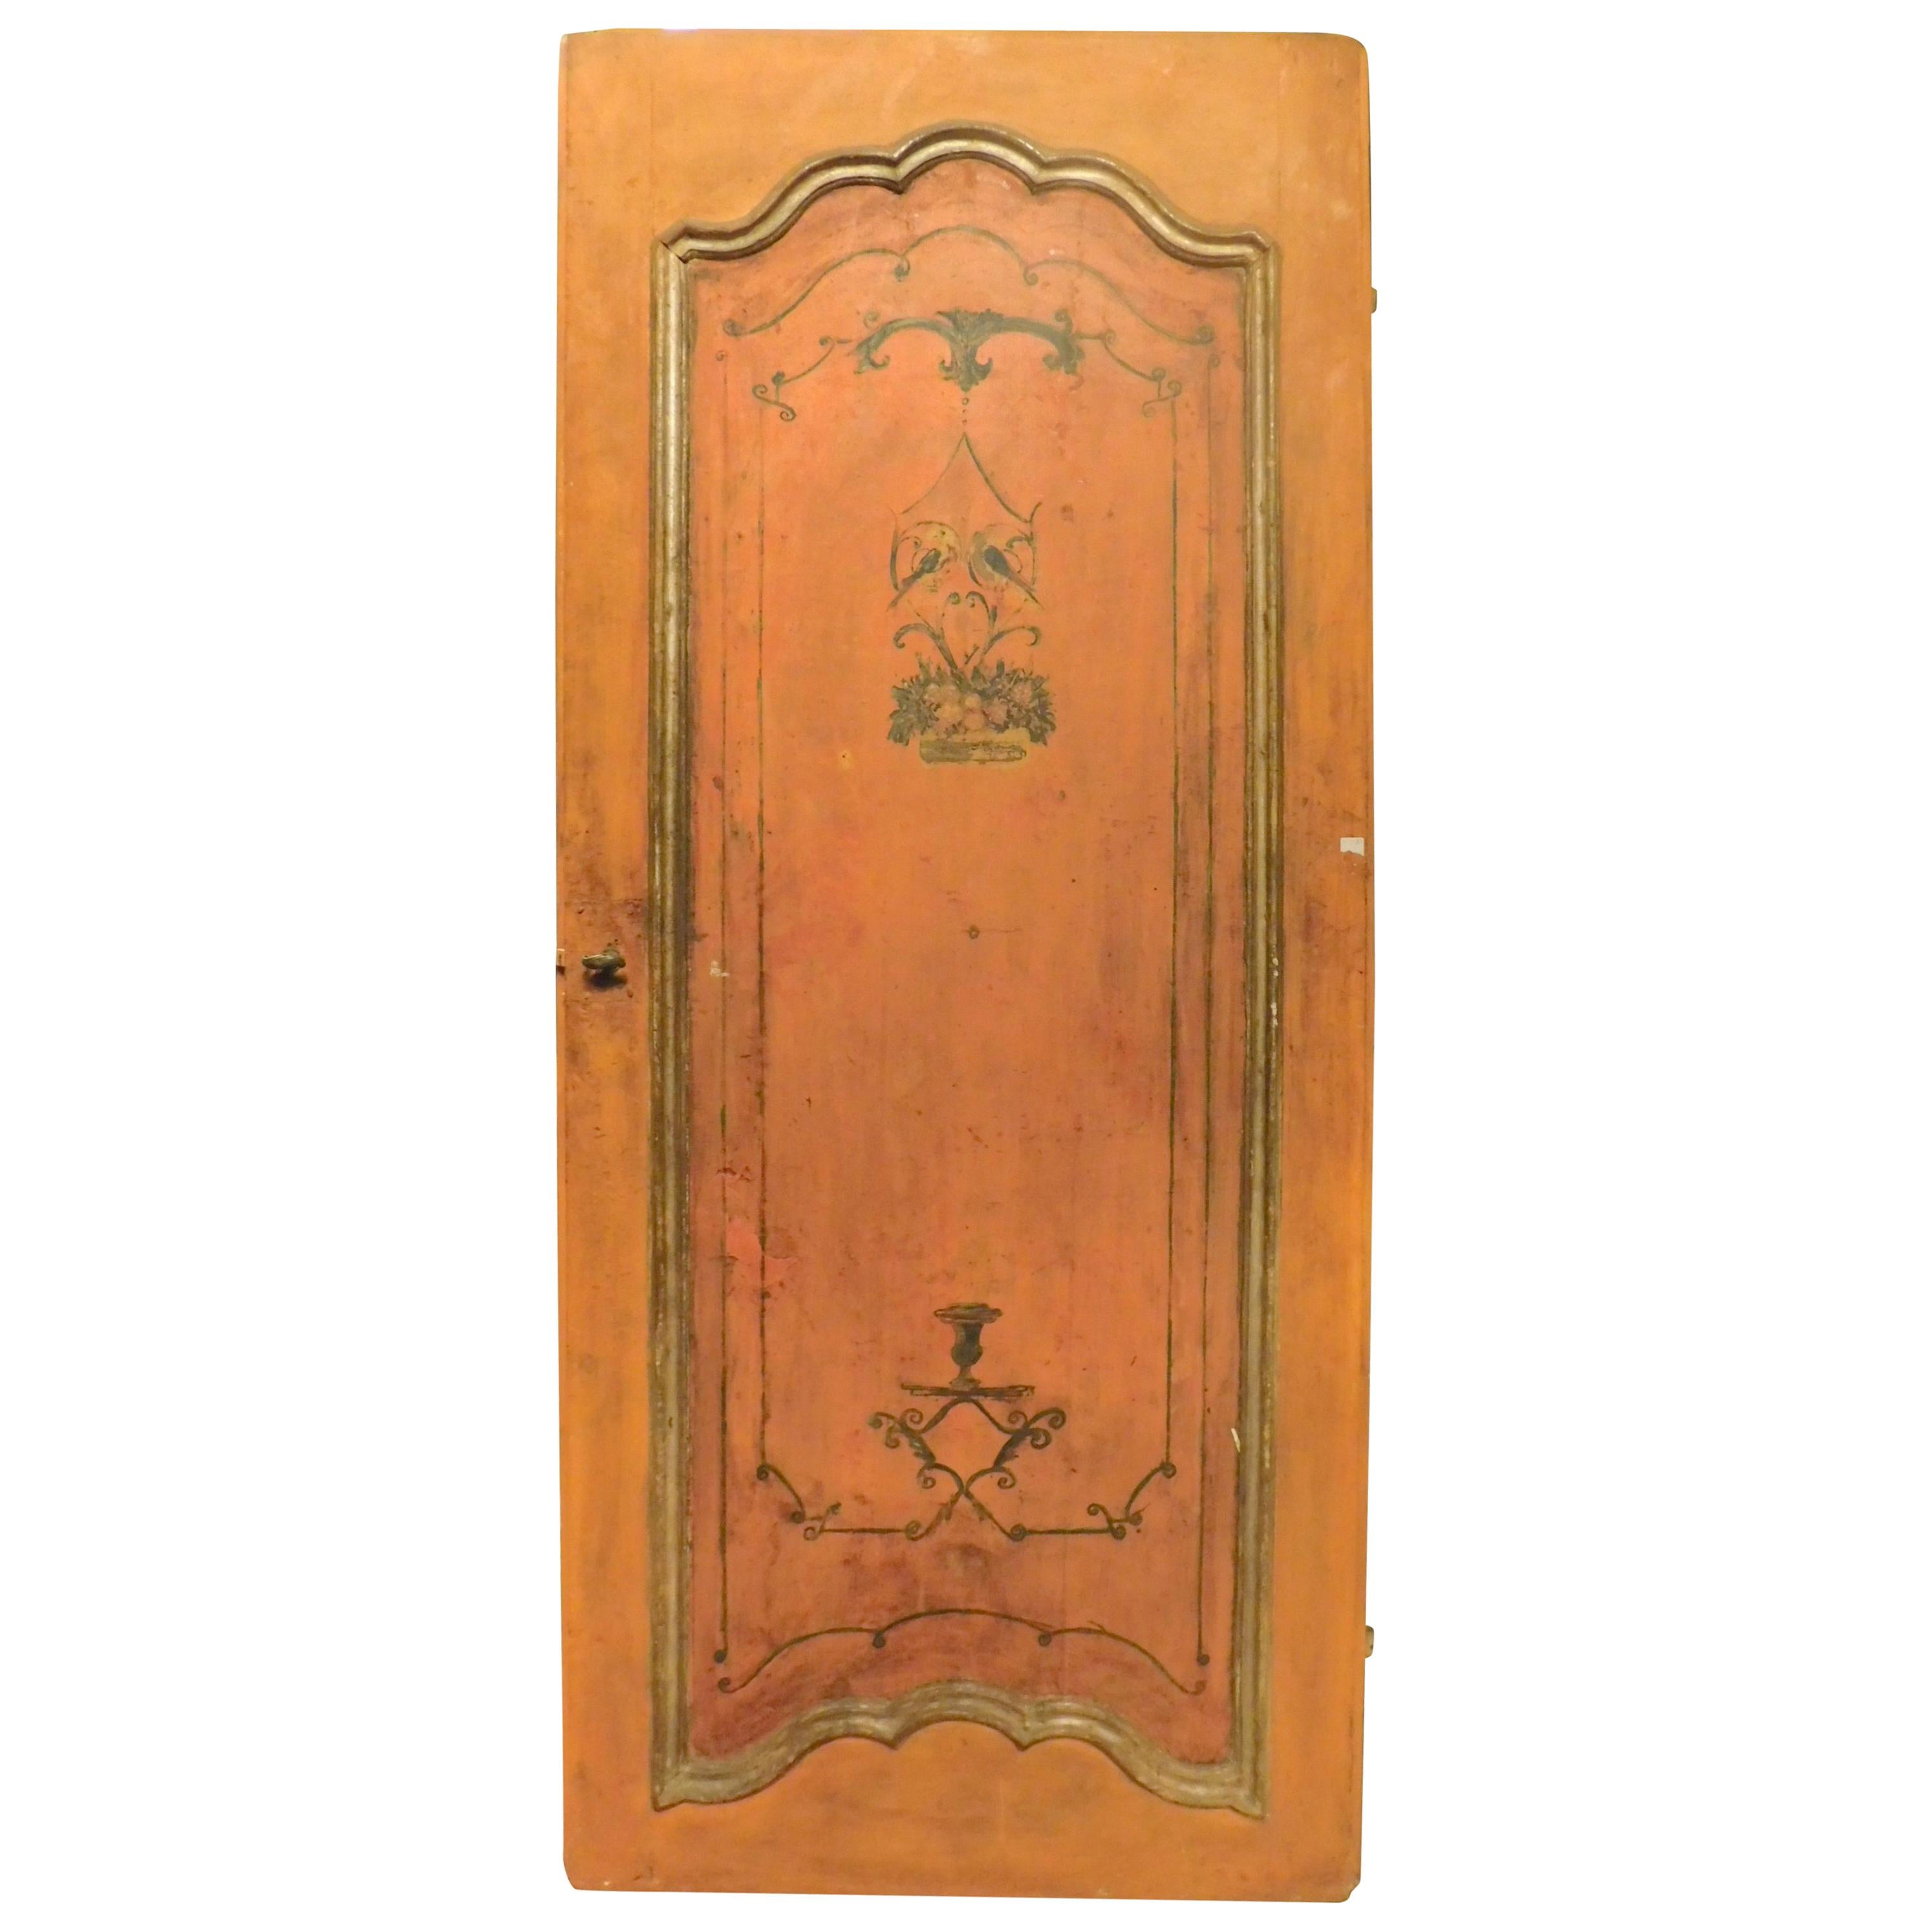 Antique Wooden Door Lacquered and Painted Orange, 1700, Italy